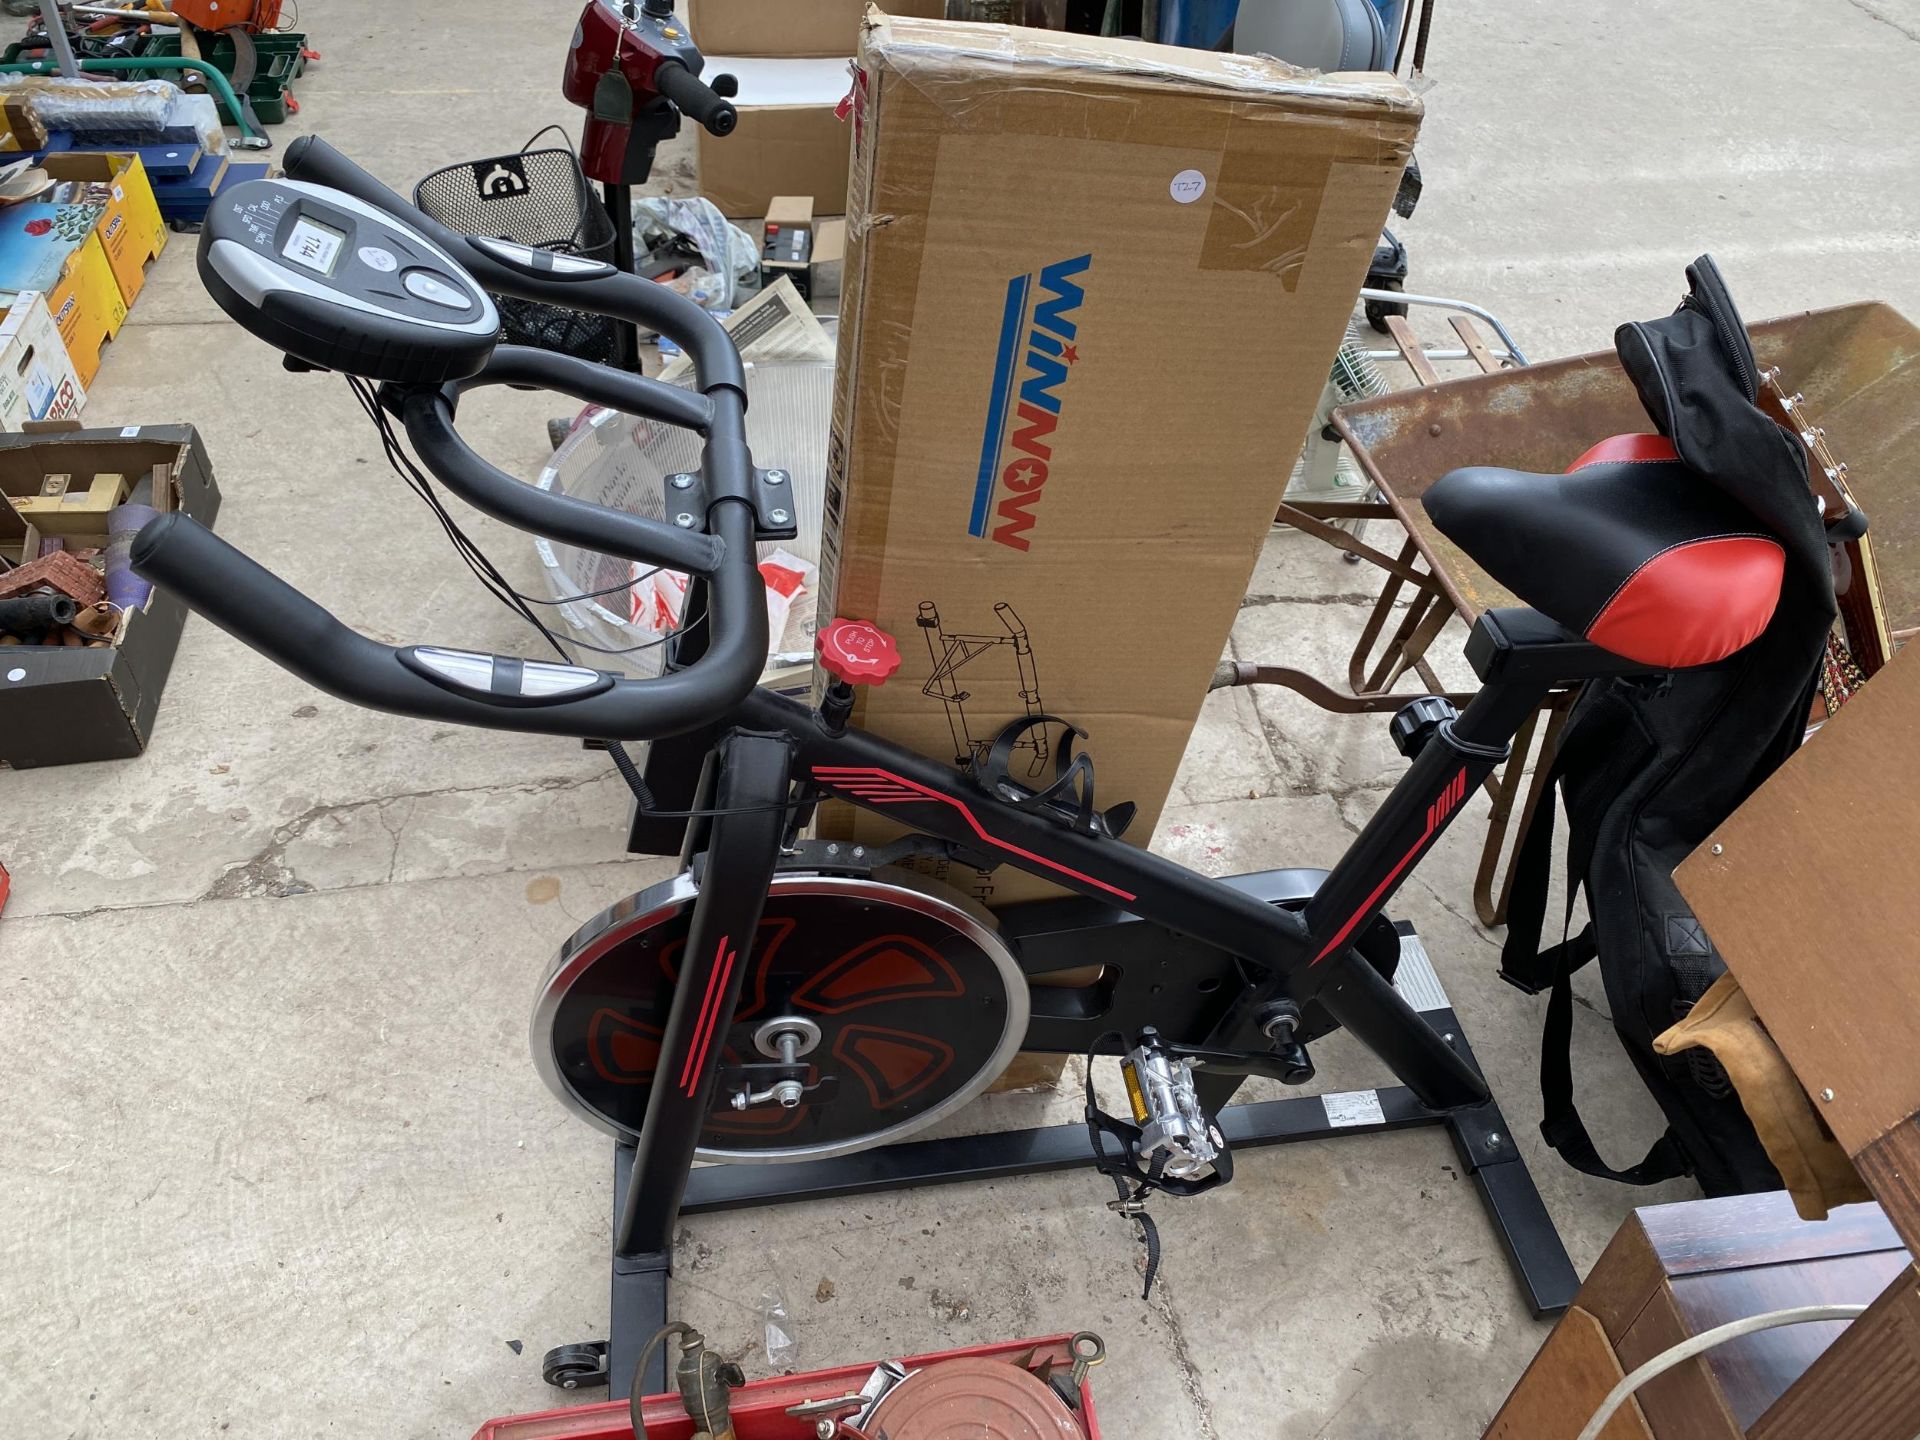 AN EXERCISE BIKE AND A DOOR FRAME PULL UP BAR